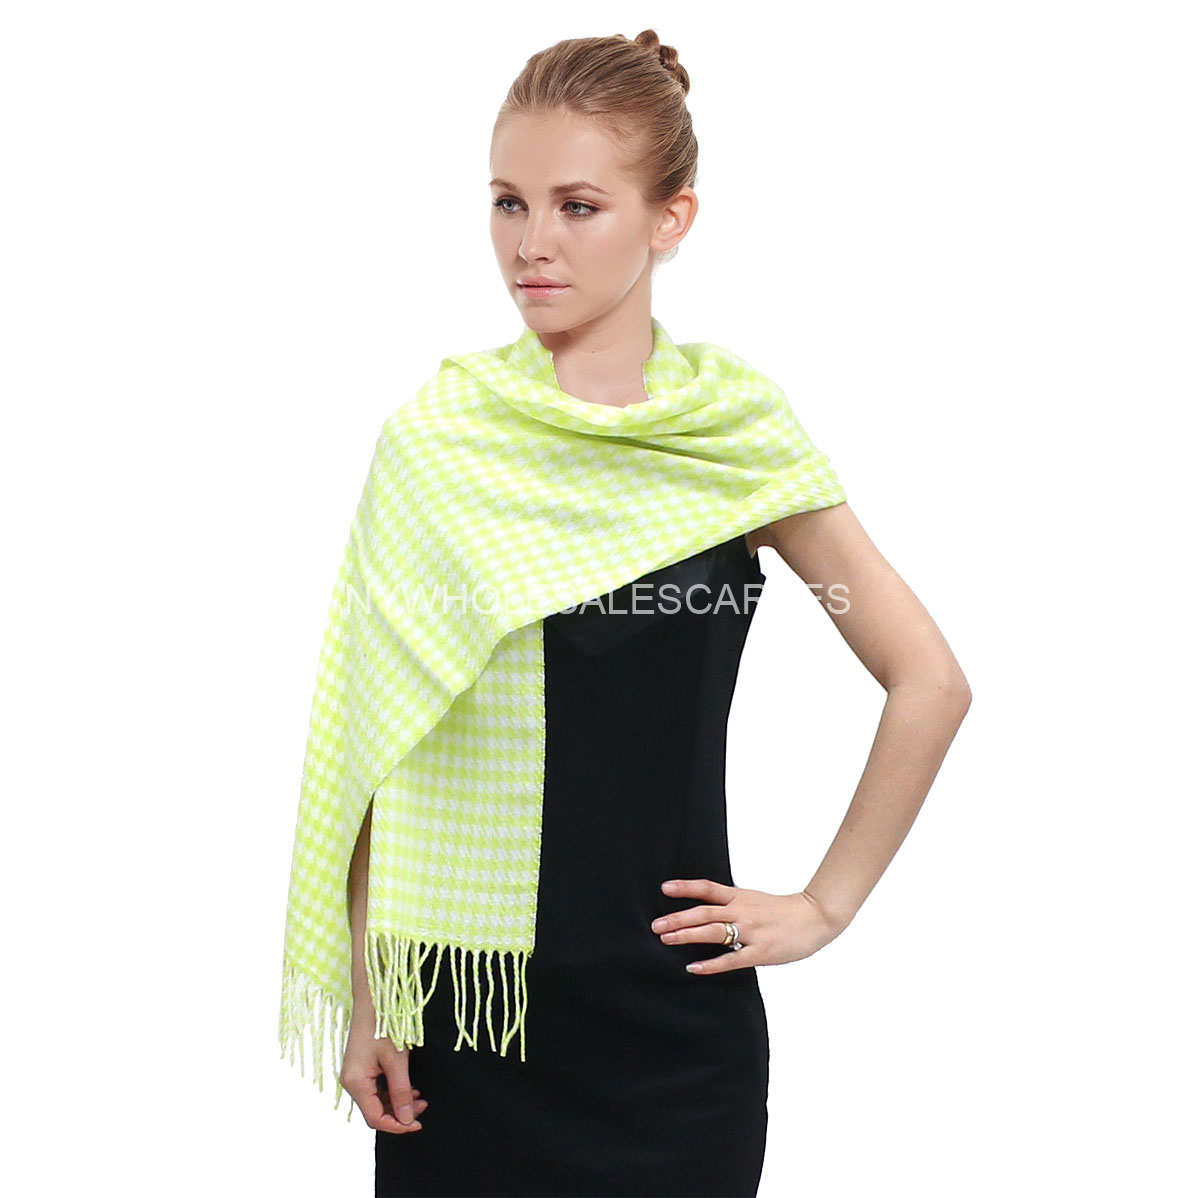 Houndstooth Plaid Scarf #06-08 Color: Yellowgreen